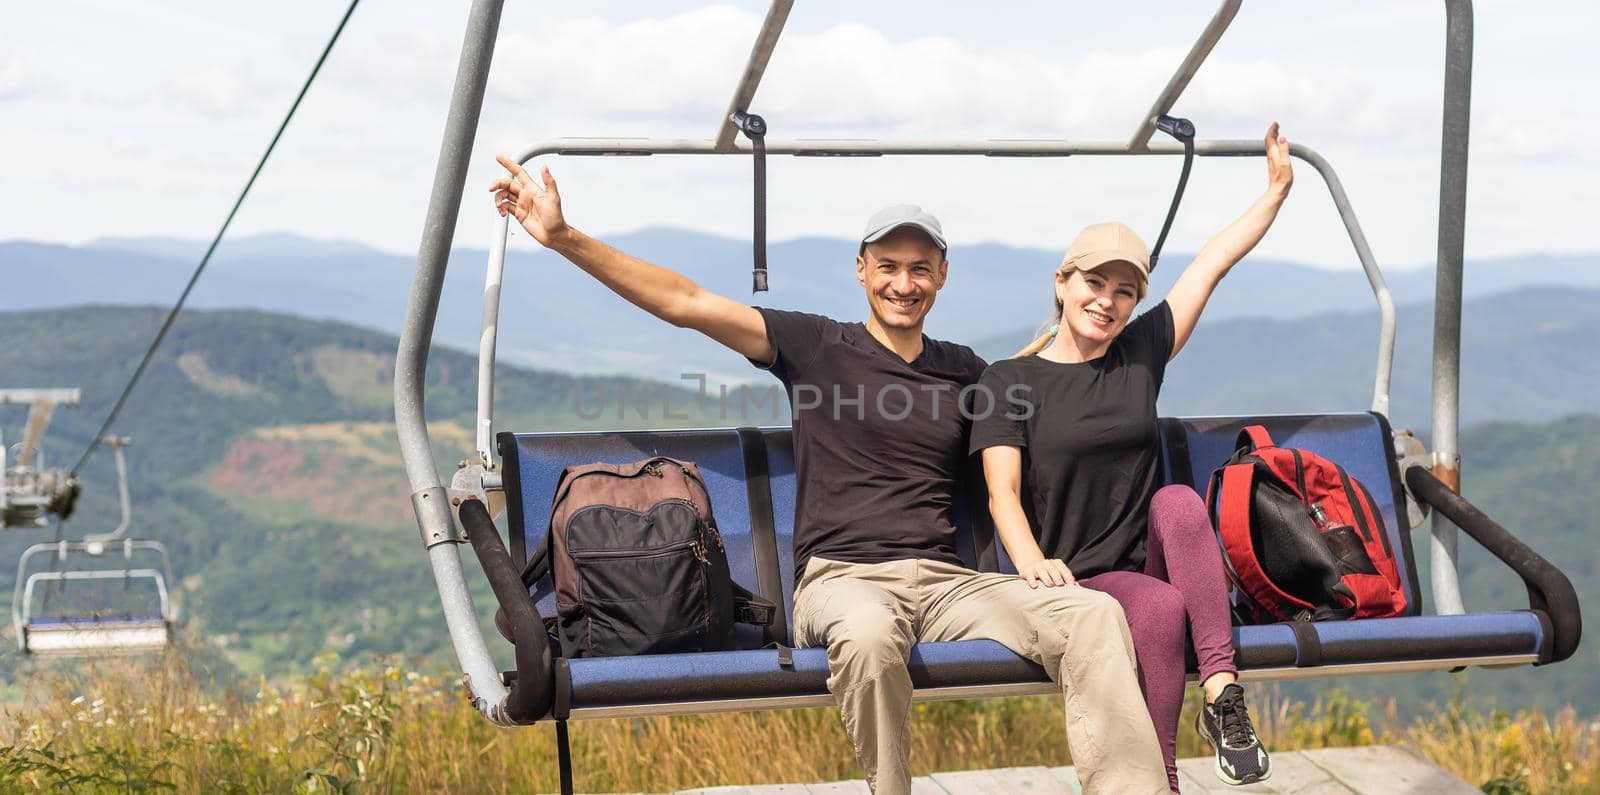 Man and a woman riding on the lift down the scenic Mountain during summer. Green tree forest surrounds the escalator. by Andelov13